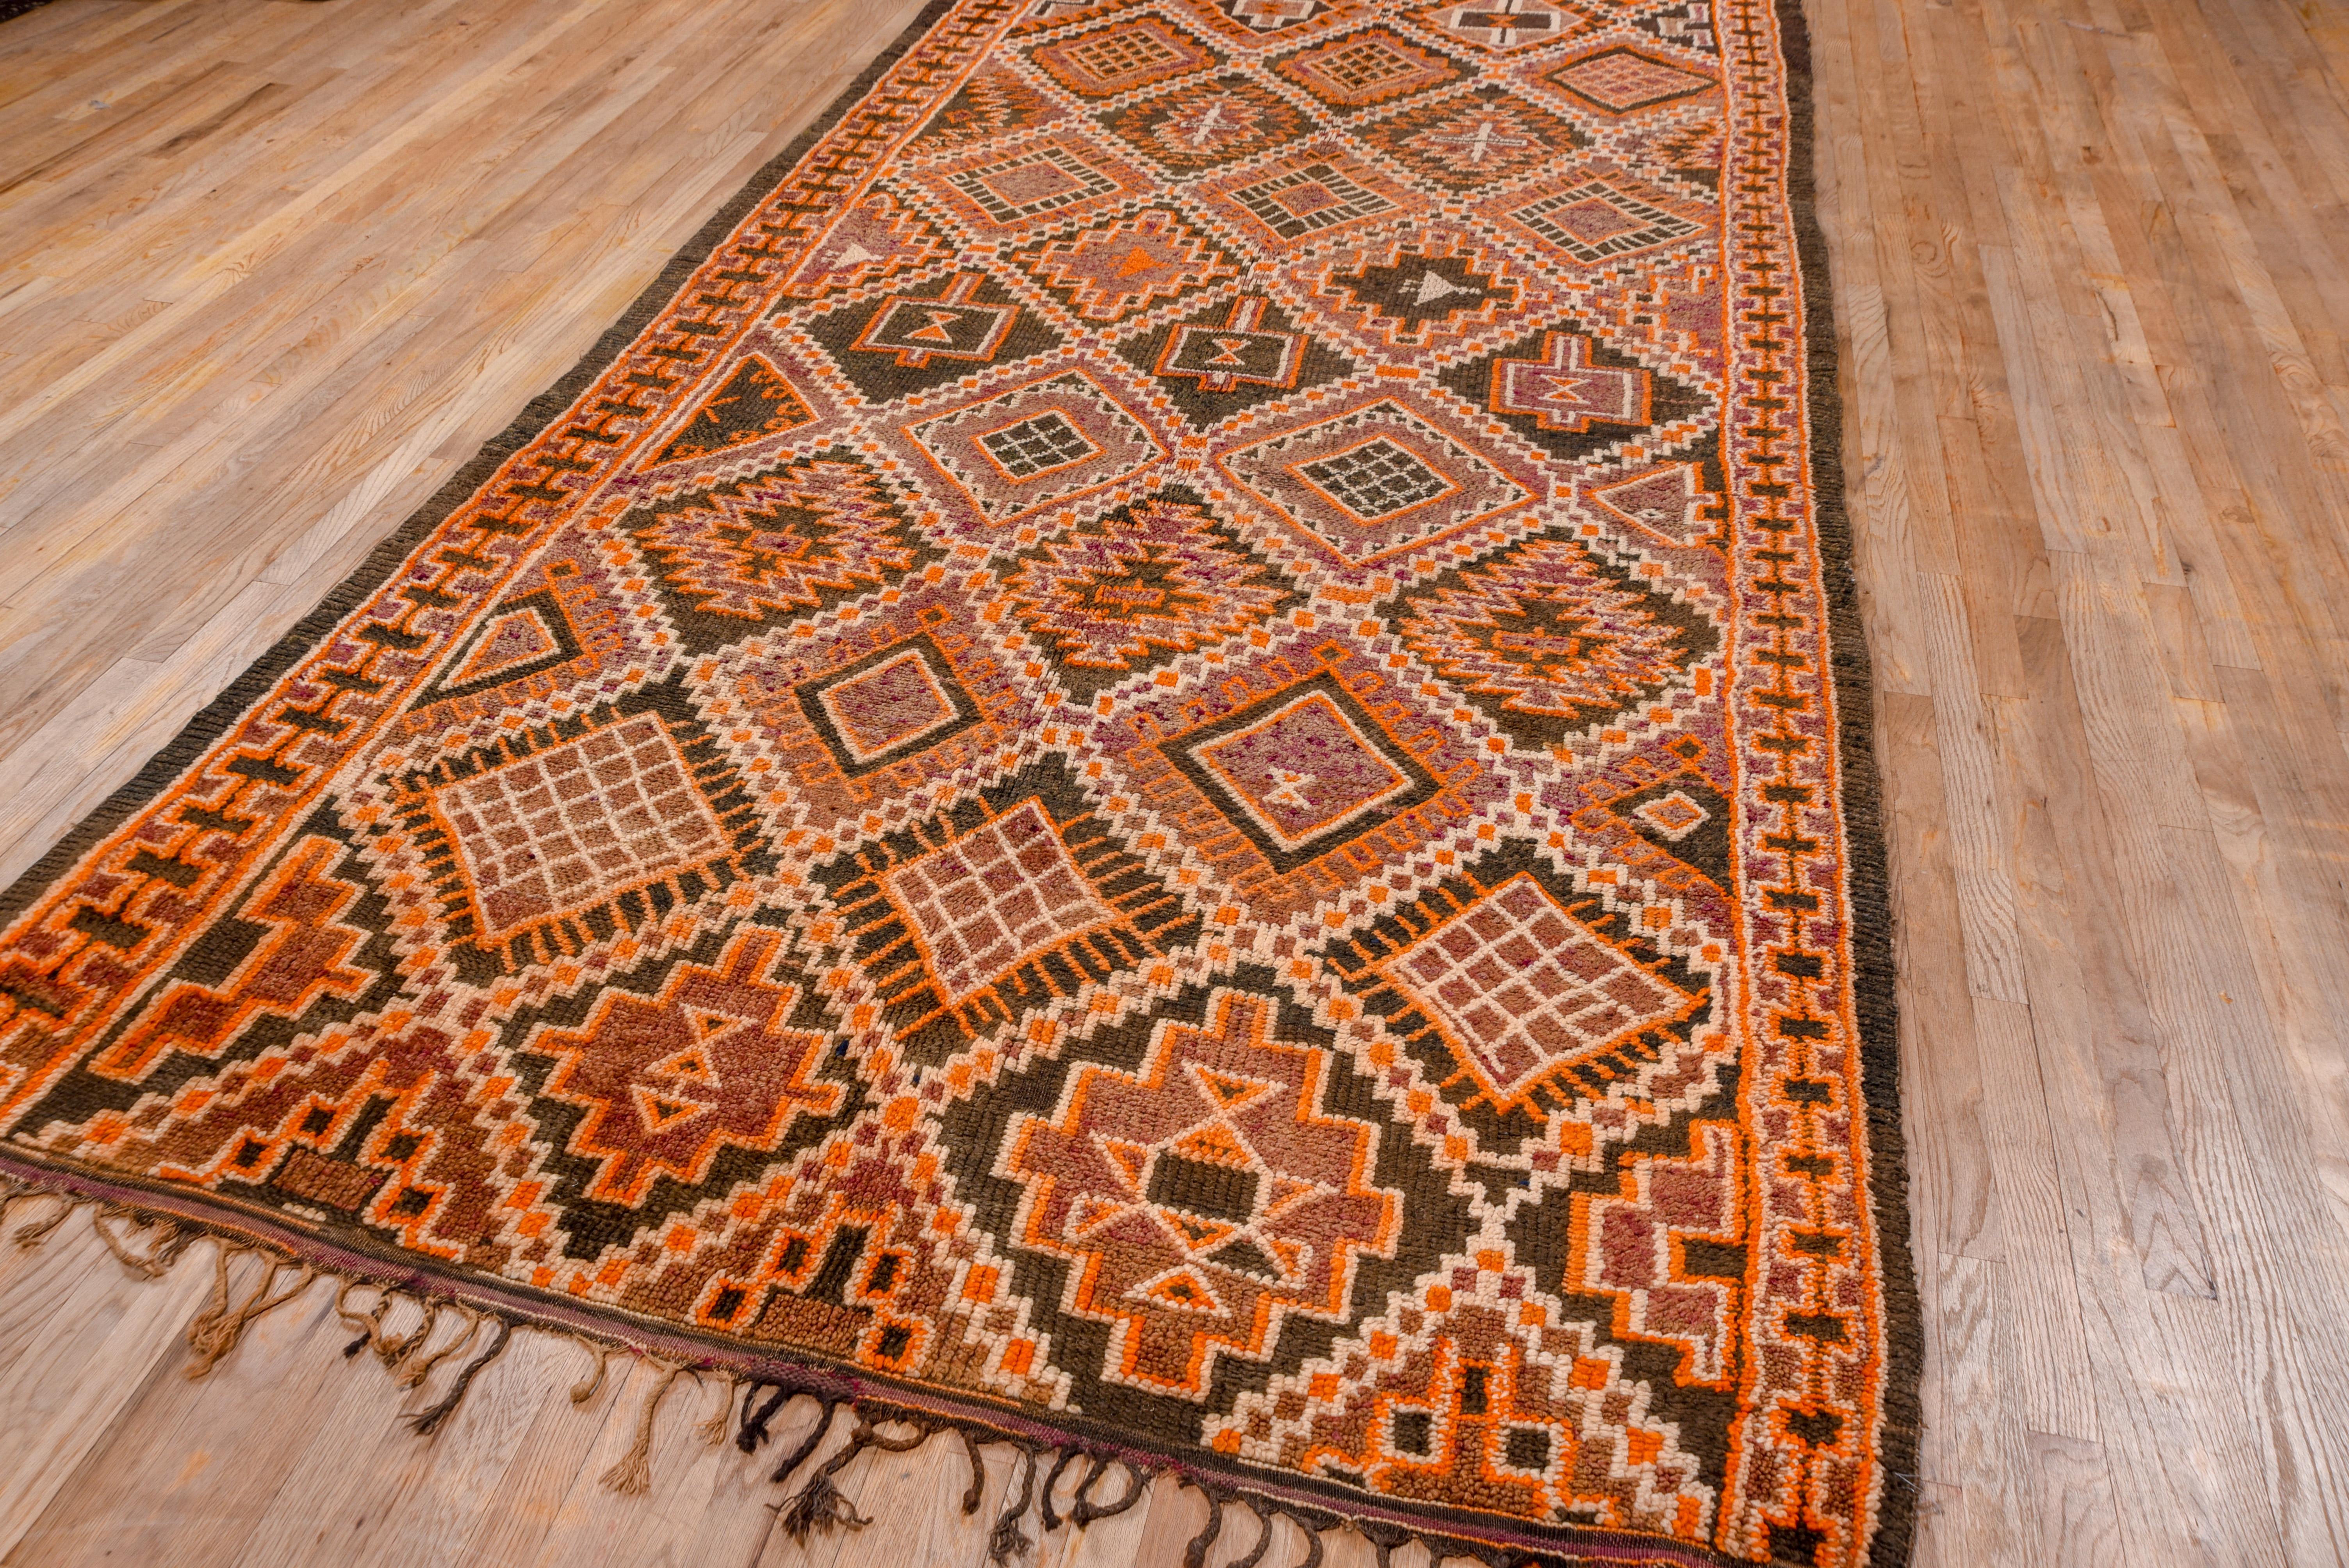 Mid-20th Century Vintage Tribal Moroccan Azilal Gallery Carpet, Orange Brown and Purple Tones For Sale